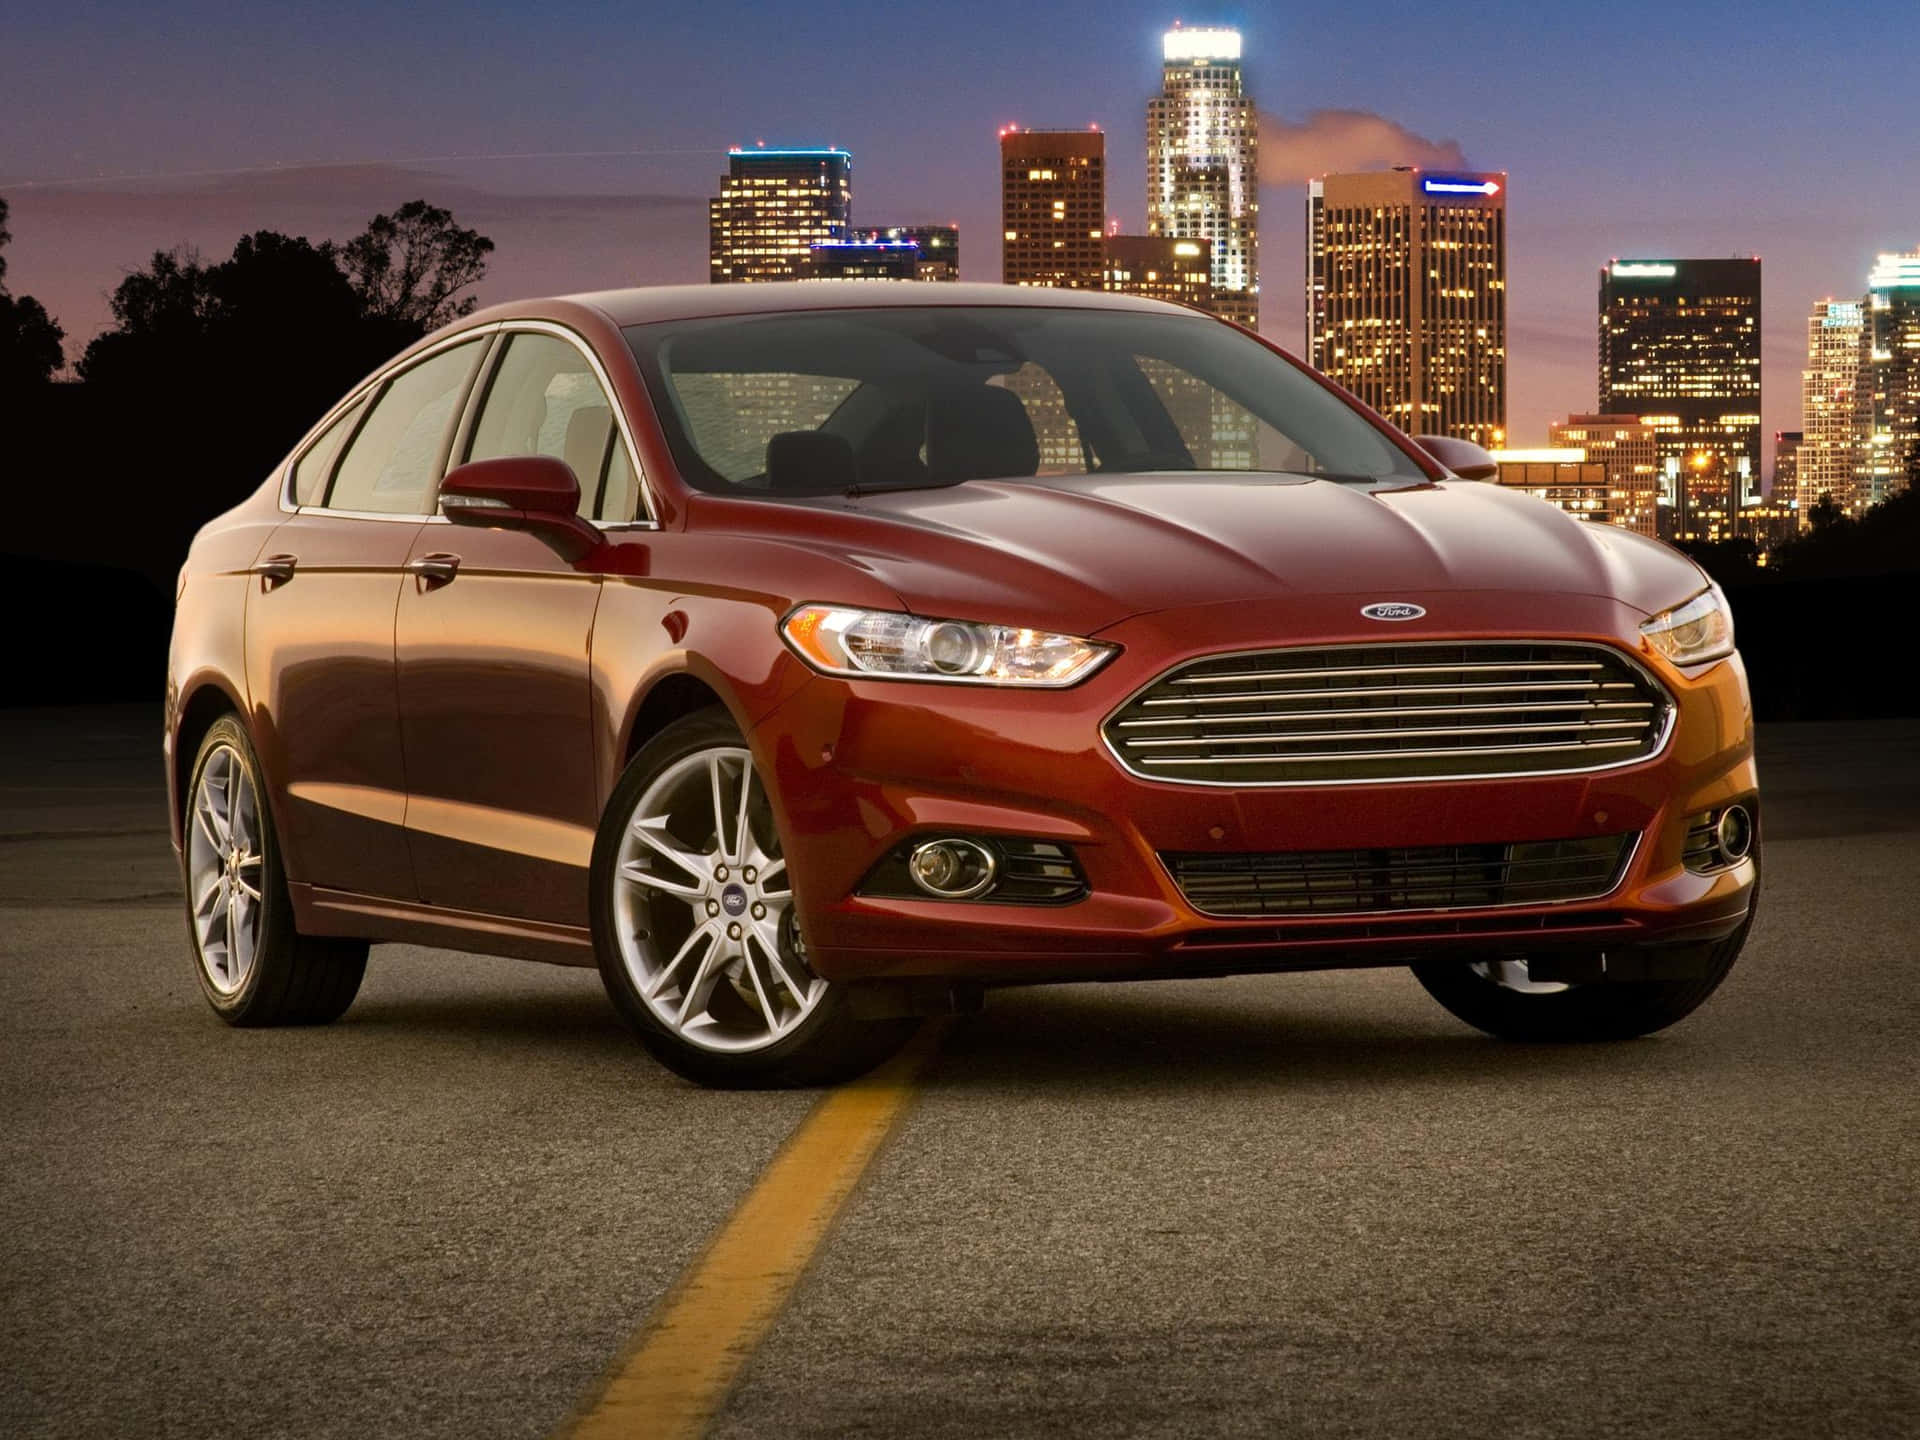 Sporty Elegance: The Stunning Ford Fusion Wallpaper